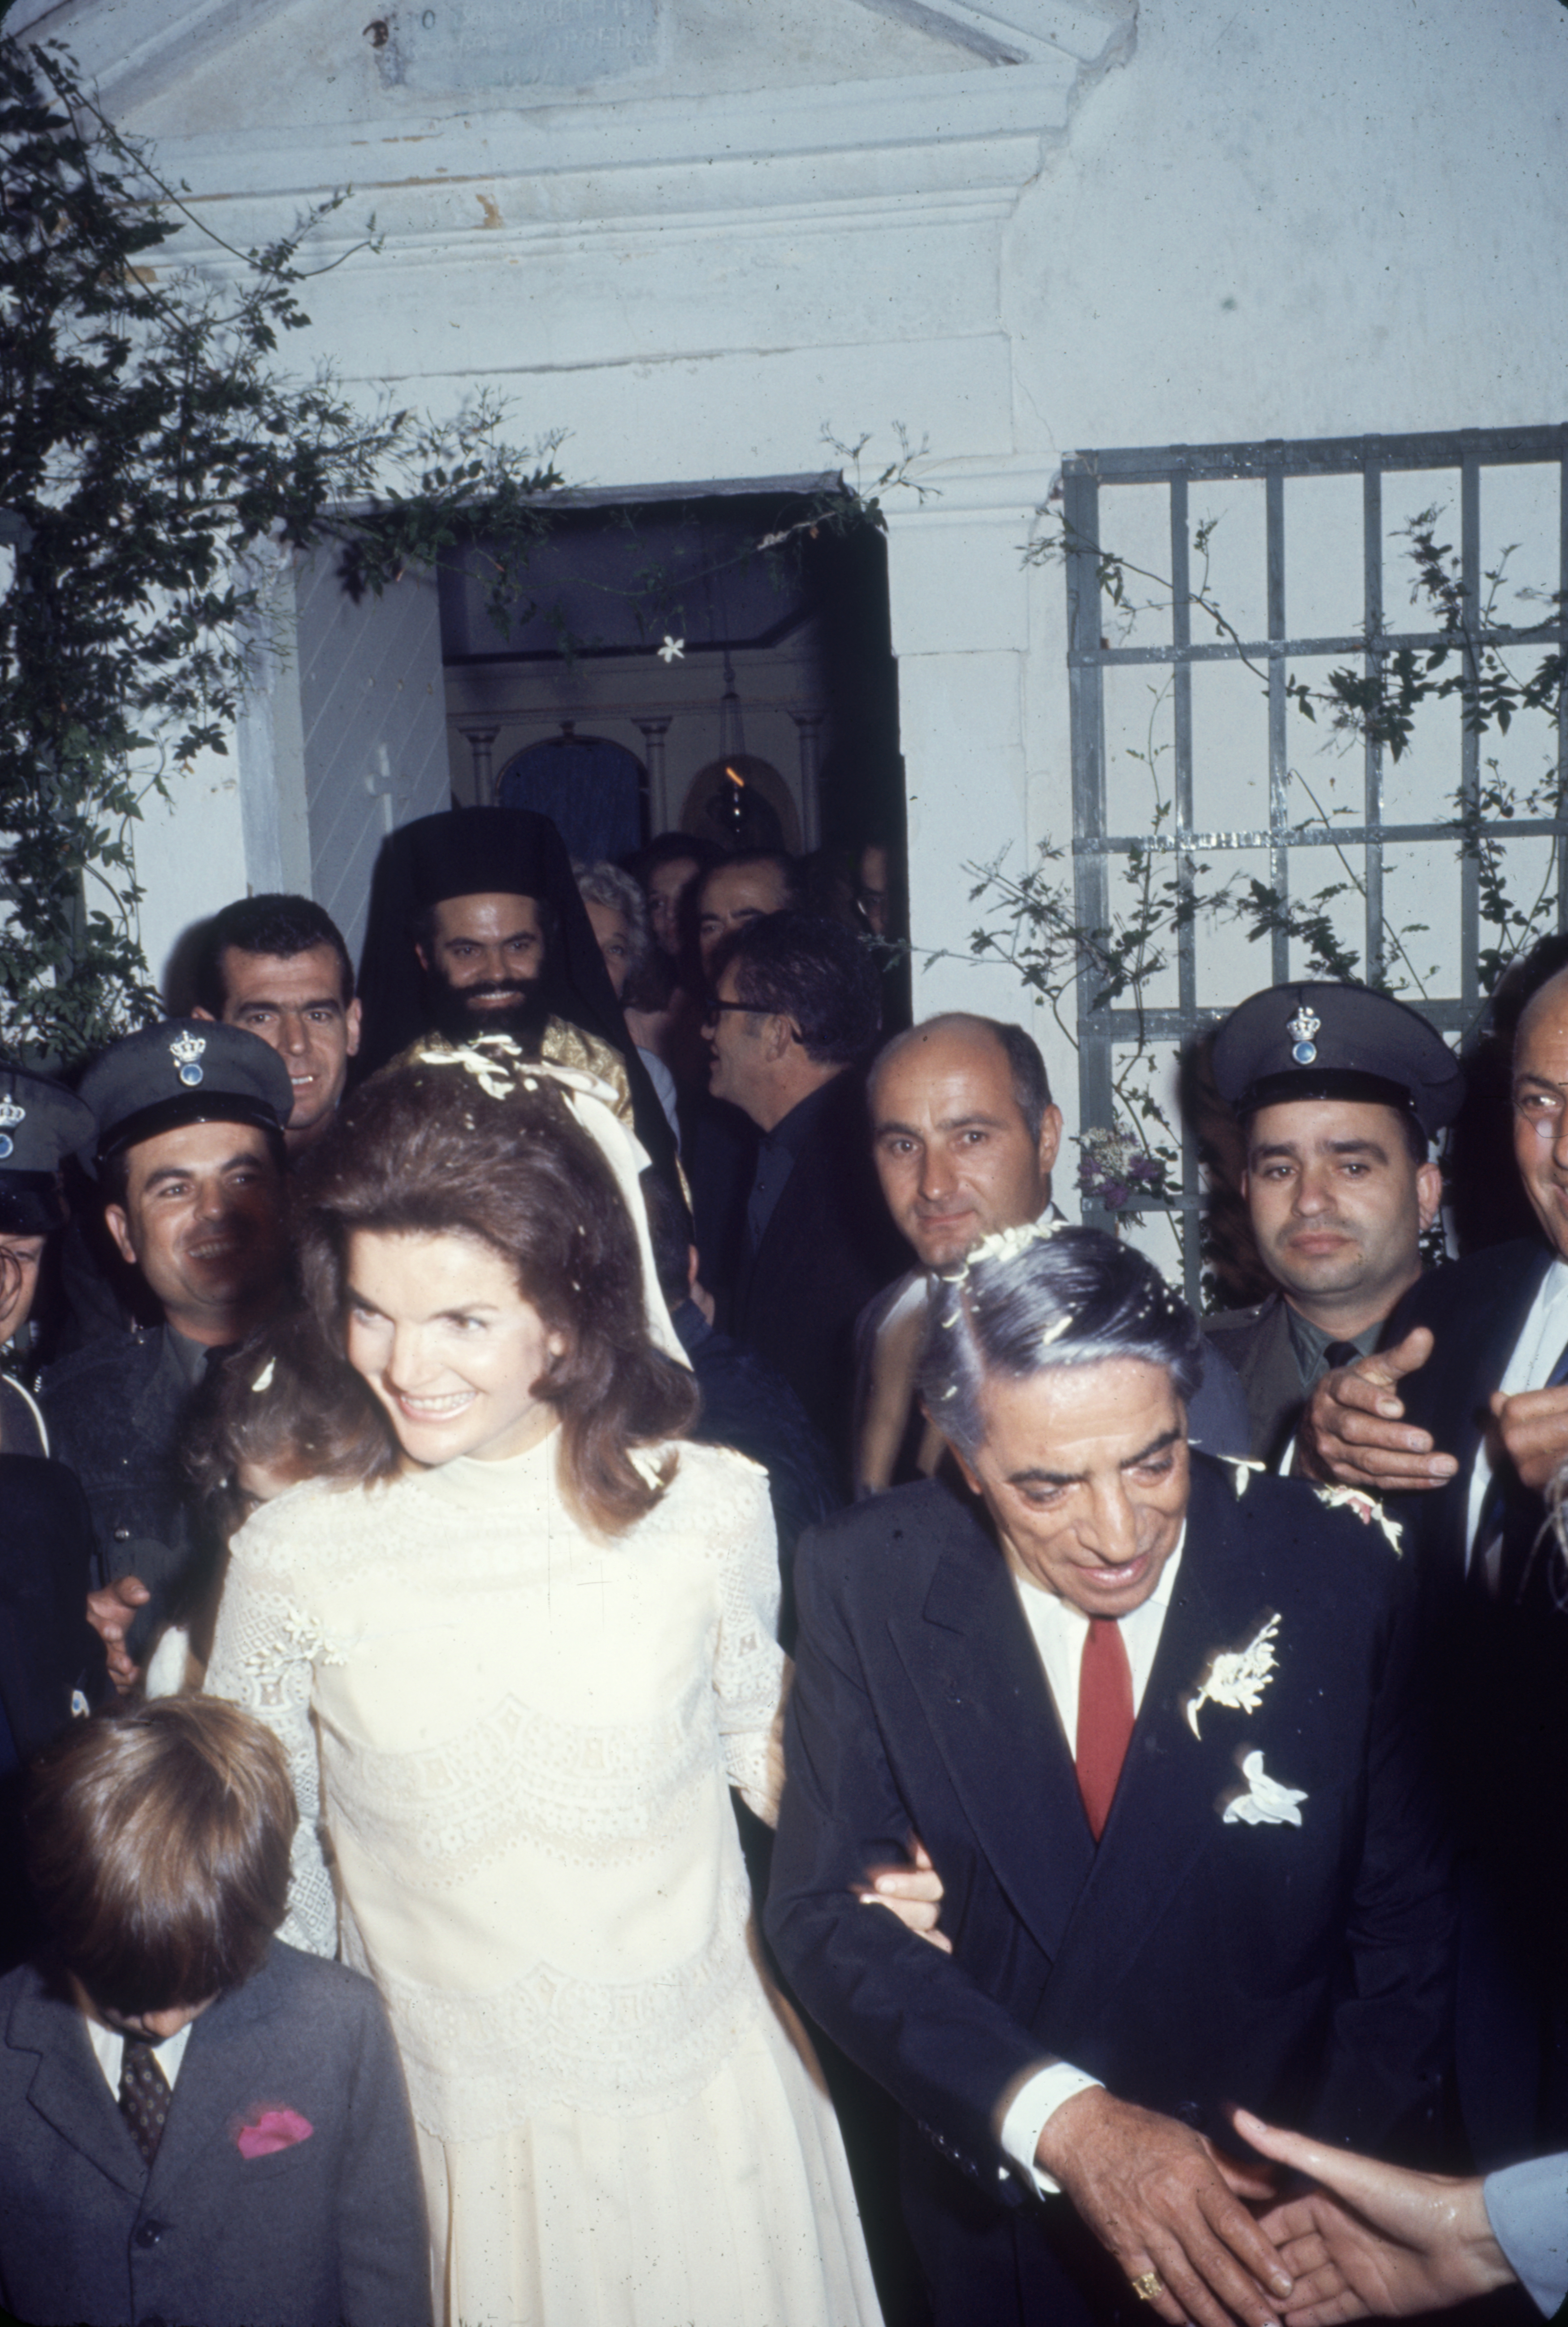 WHAT HAPPENED to Jacqueline Kennedy's pink suit? Famous historical fashion